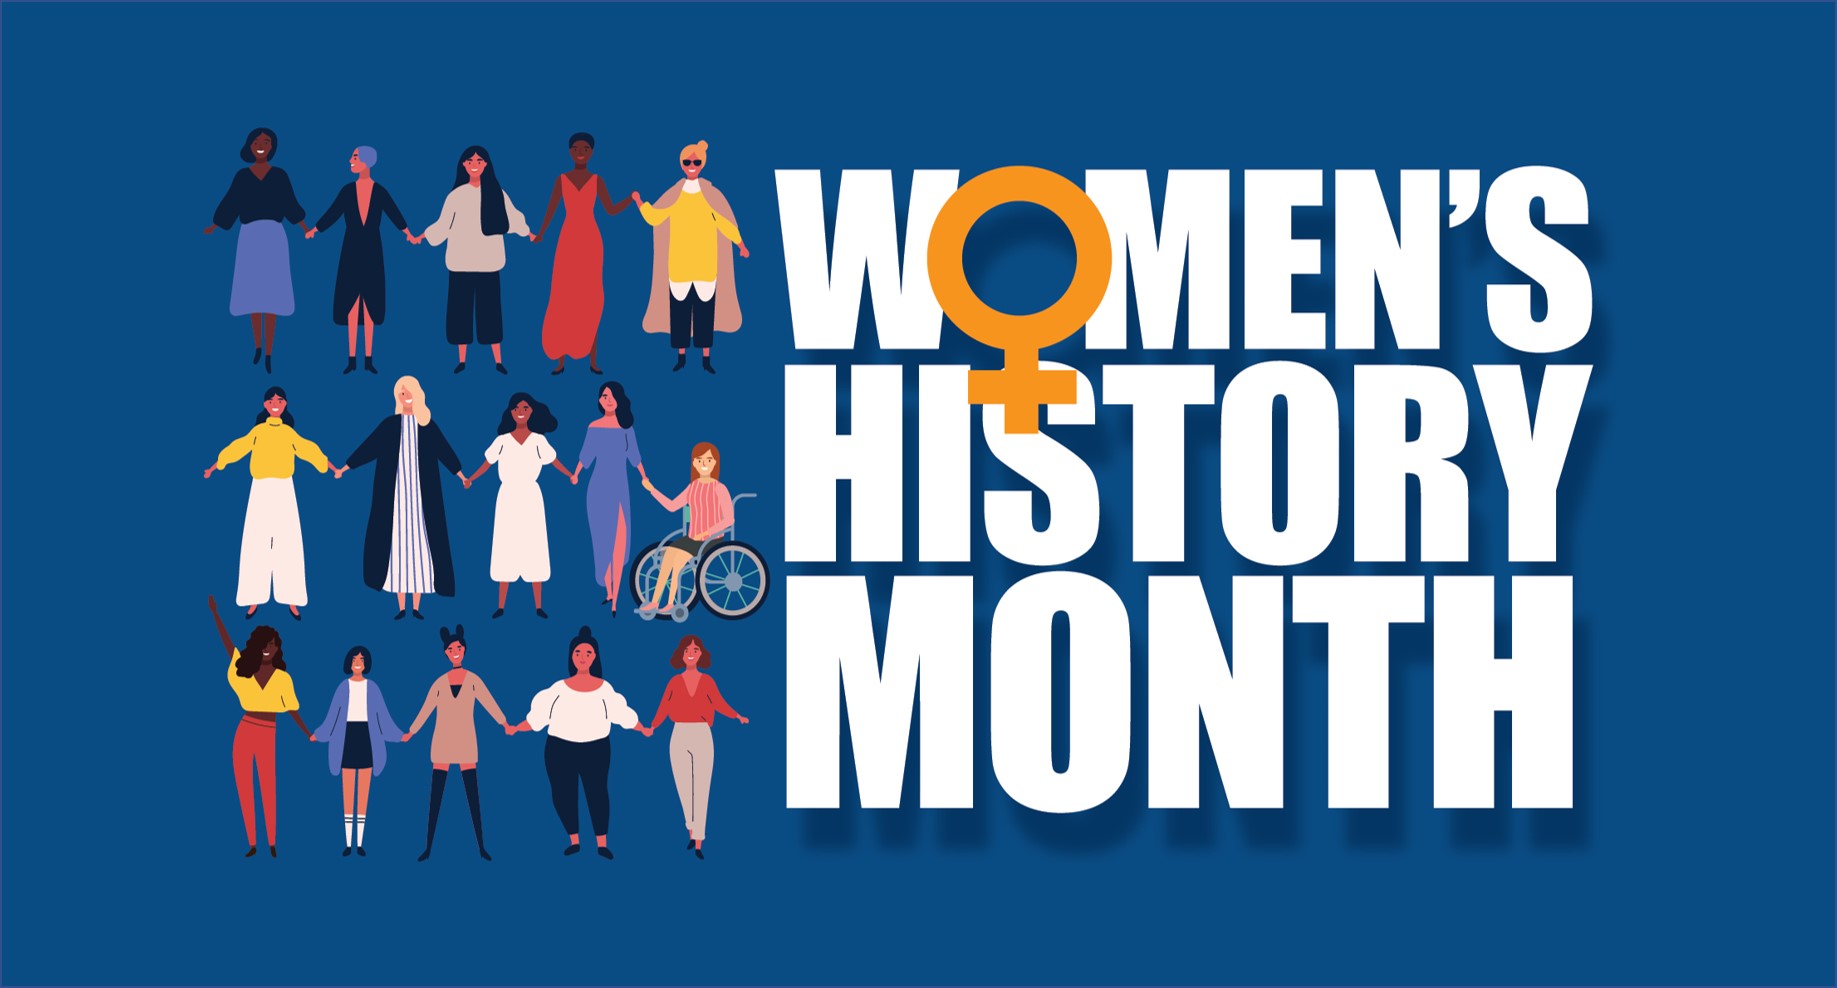 Image with text - women's history month